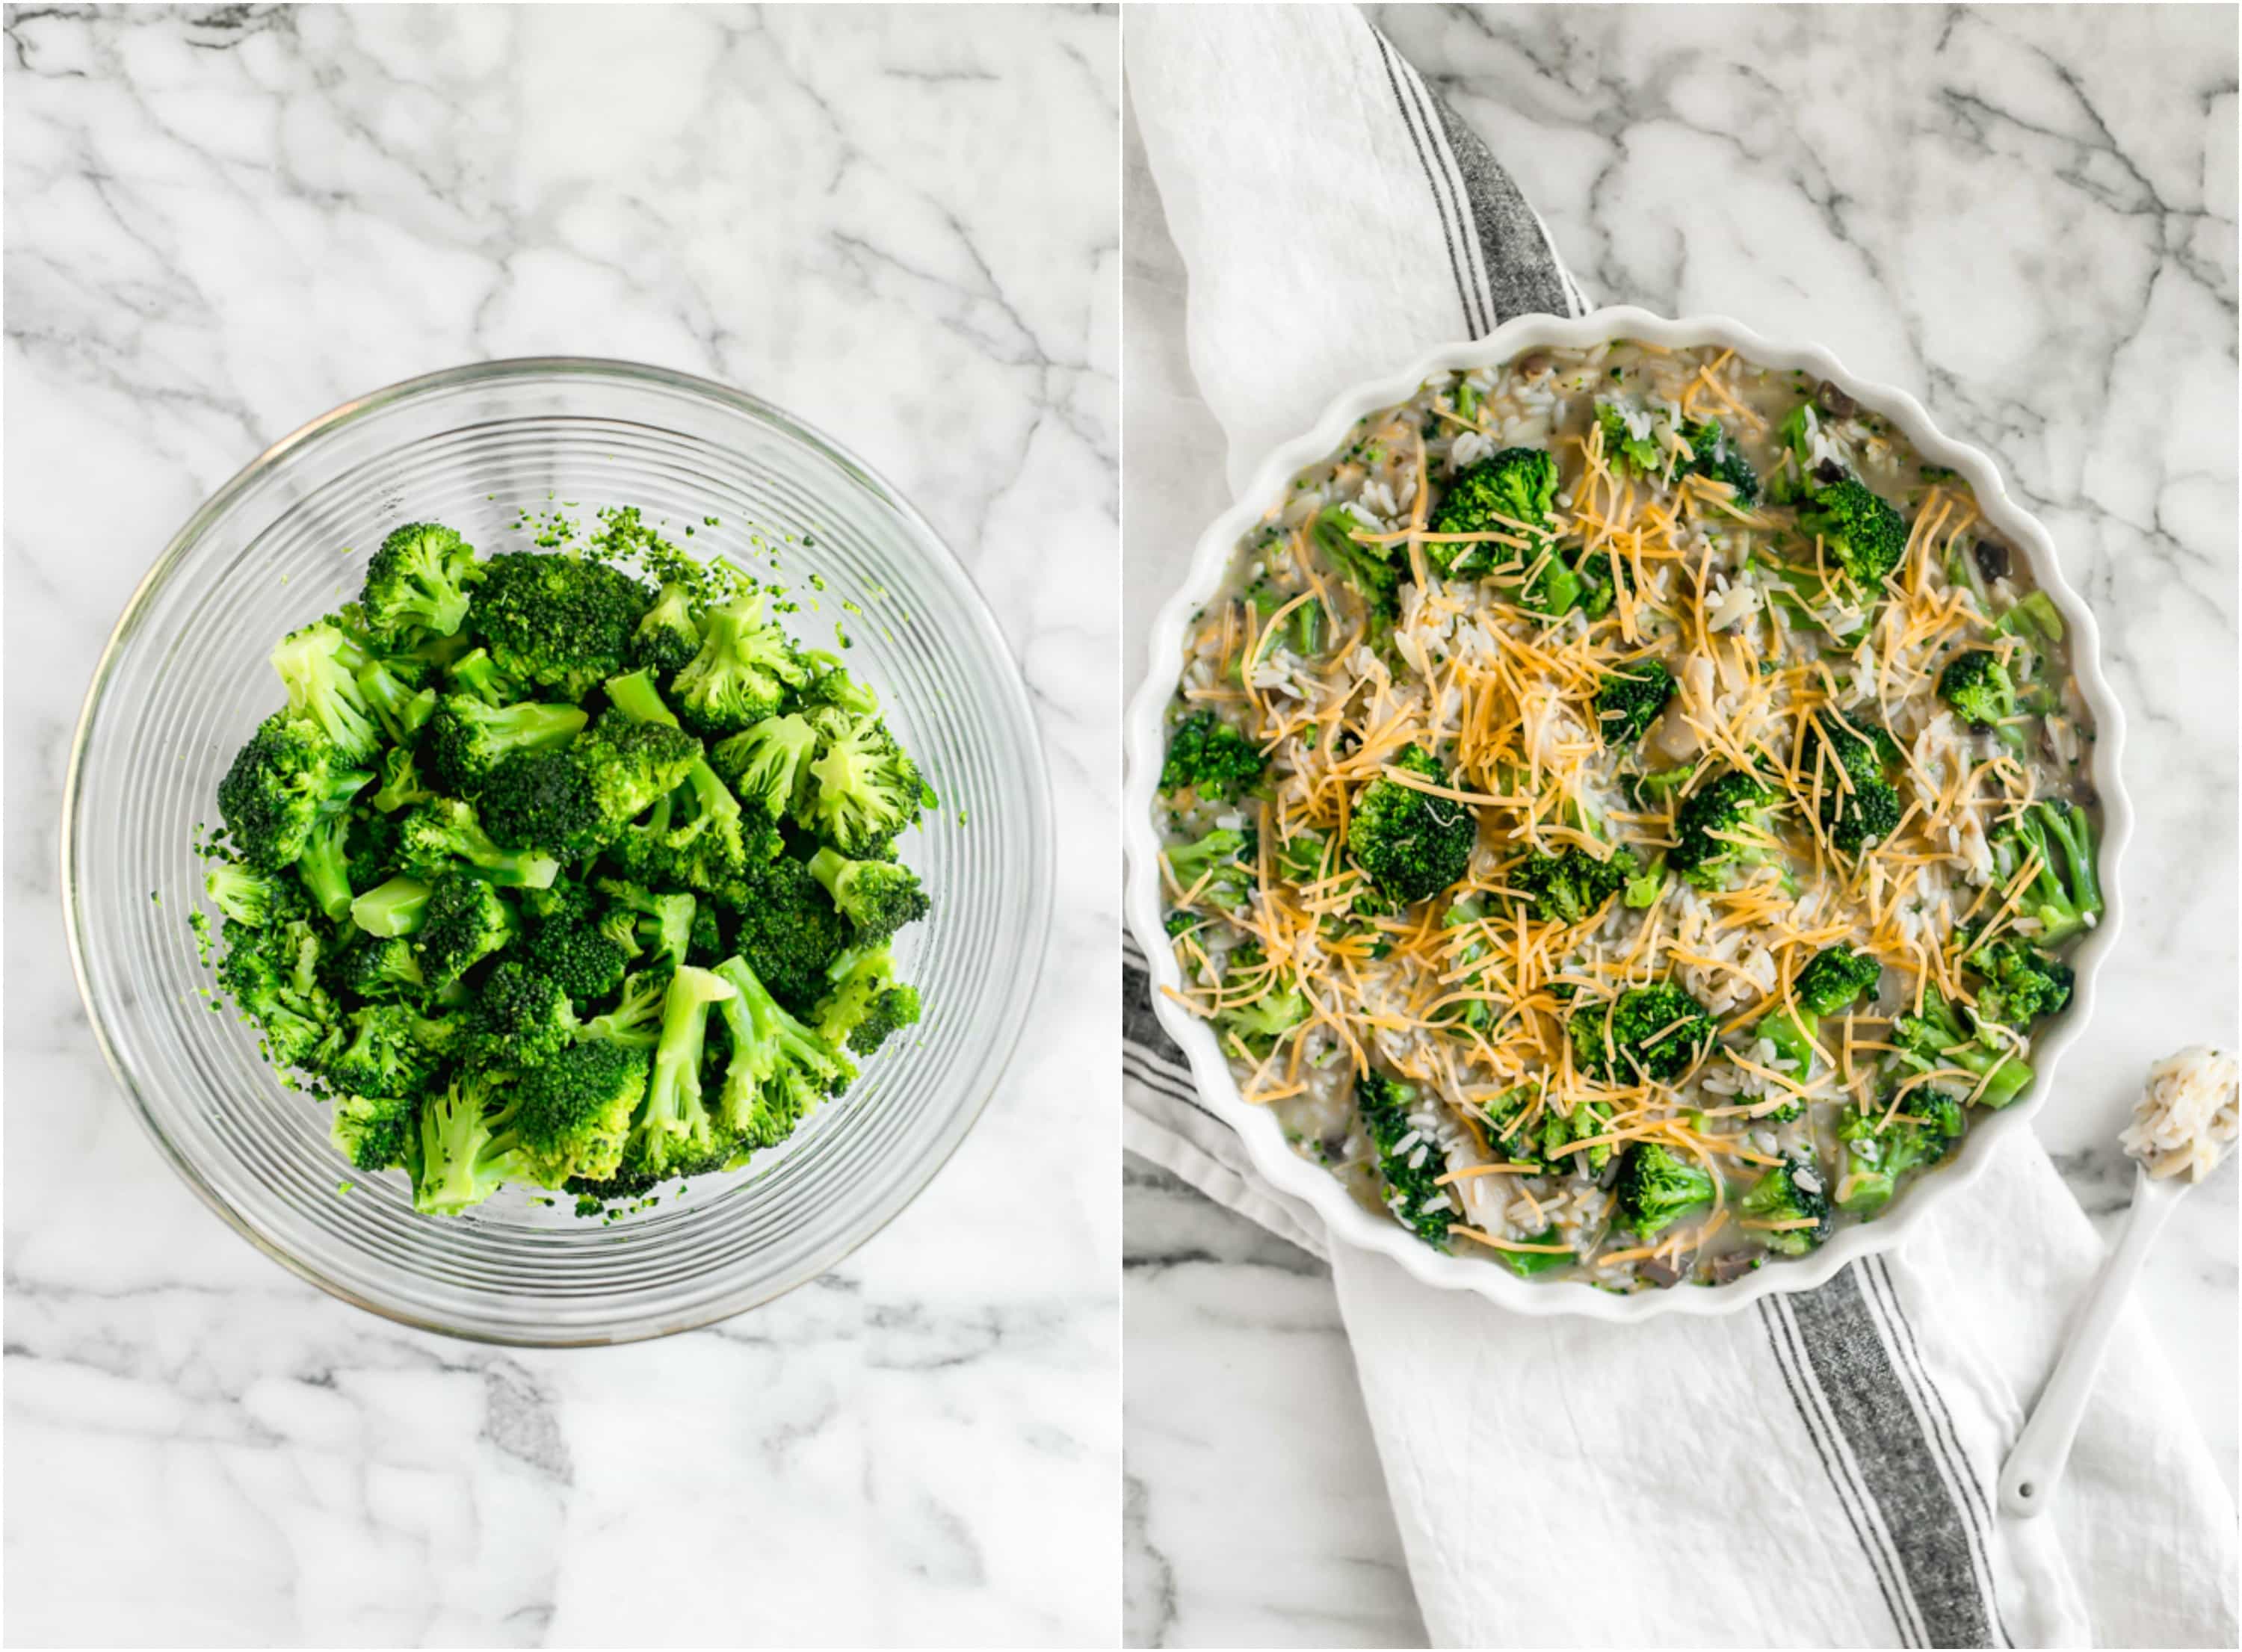 Photo Collage: Bowl of broccoli; casserole dish filled with broccoli, rice, cheese